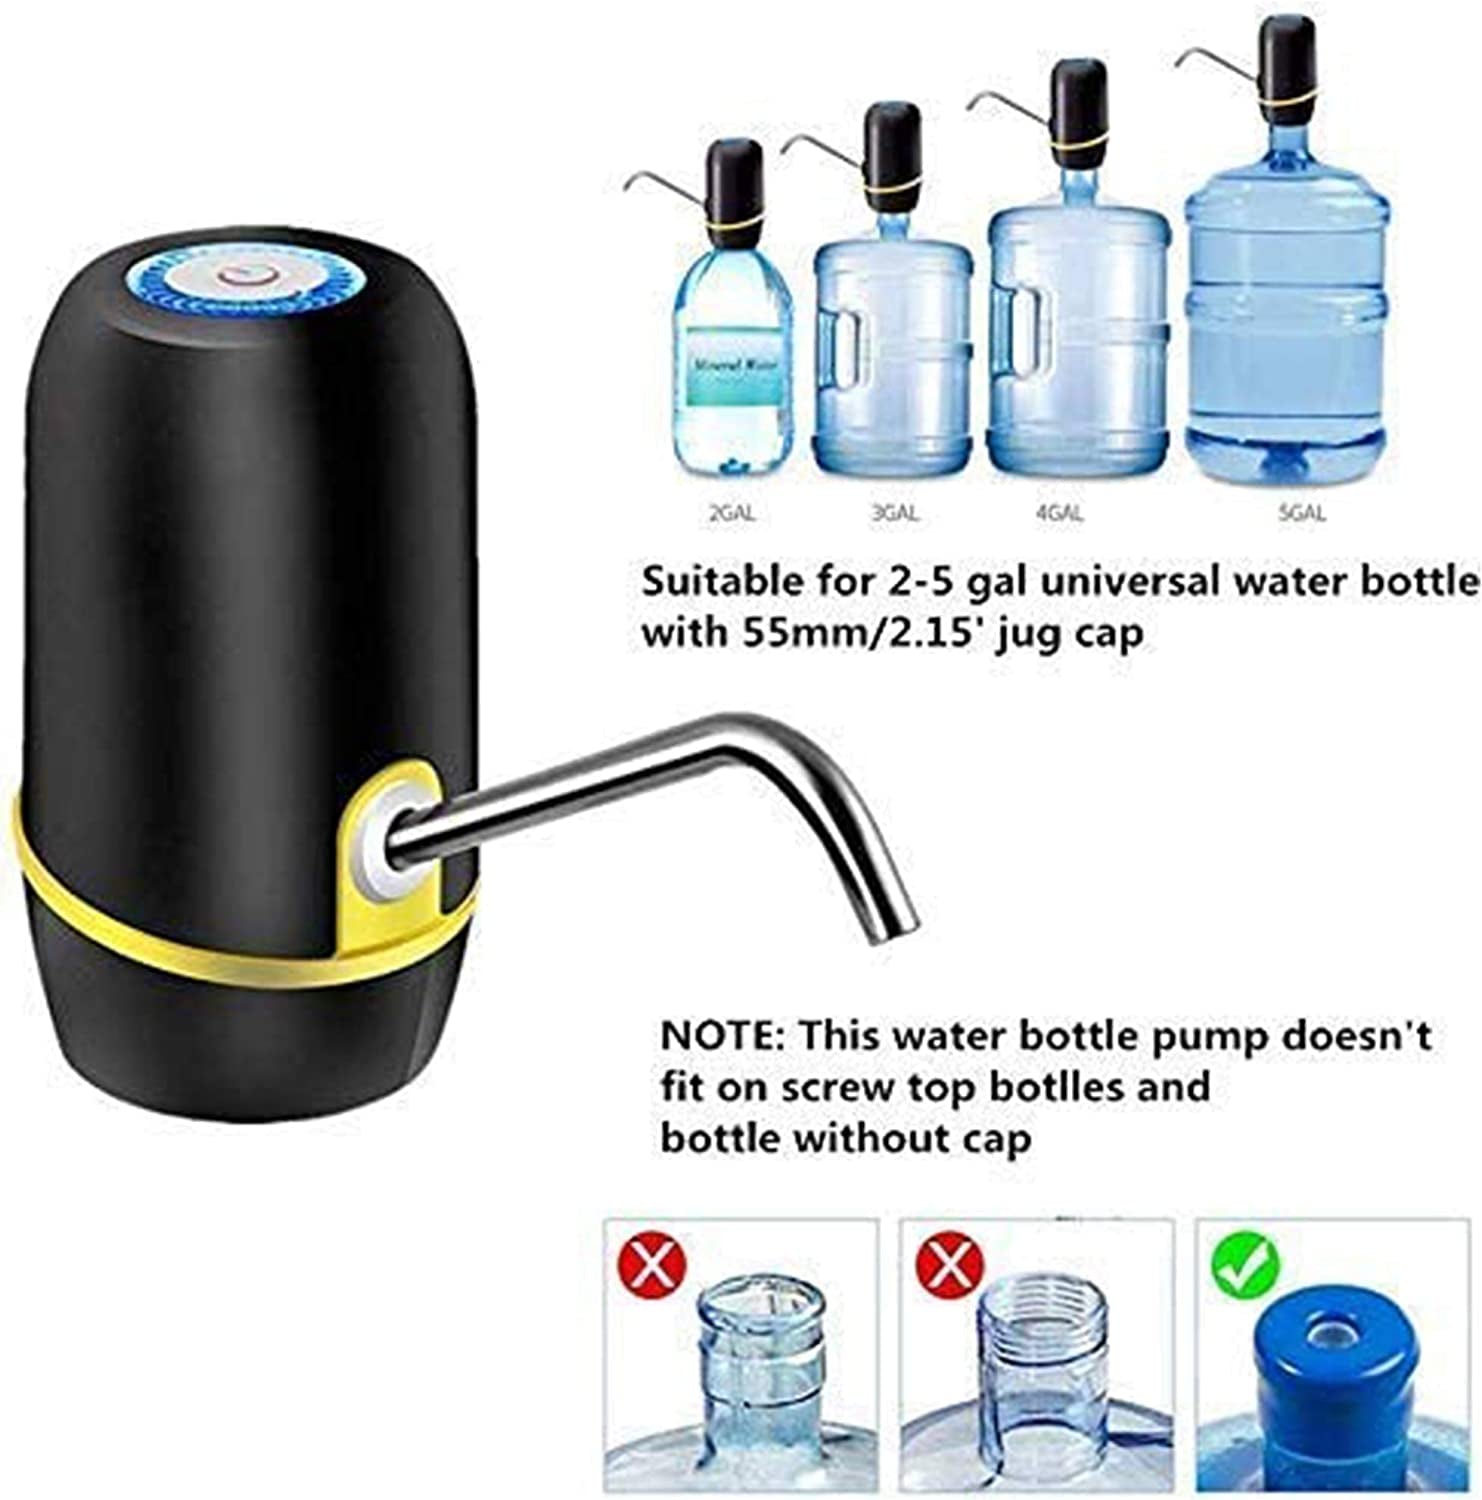 Water Jug Pump, Electric Water Bottle Pump, USB Charging Automatic Drinking Water Pump for Universal ３－5 Gallon Bottle, Portable Water Dispenser for Camping